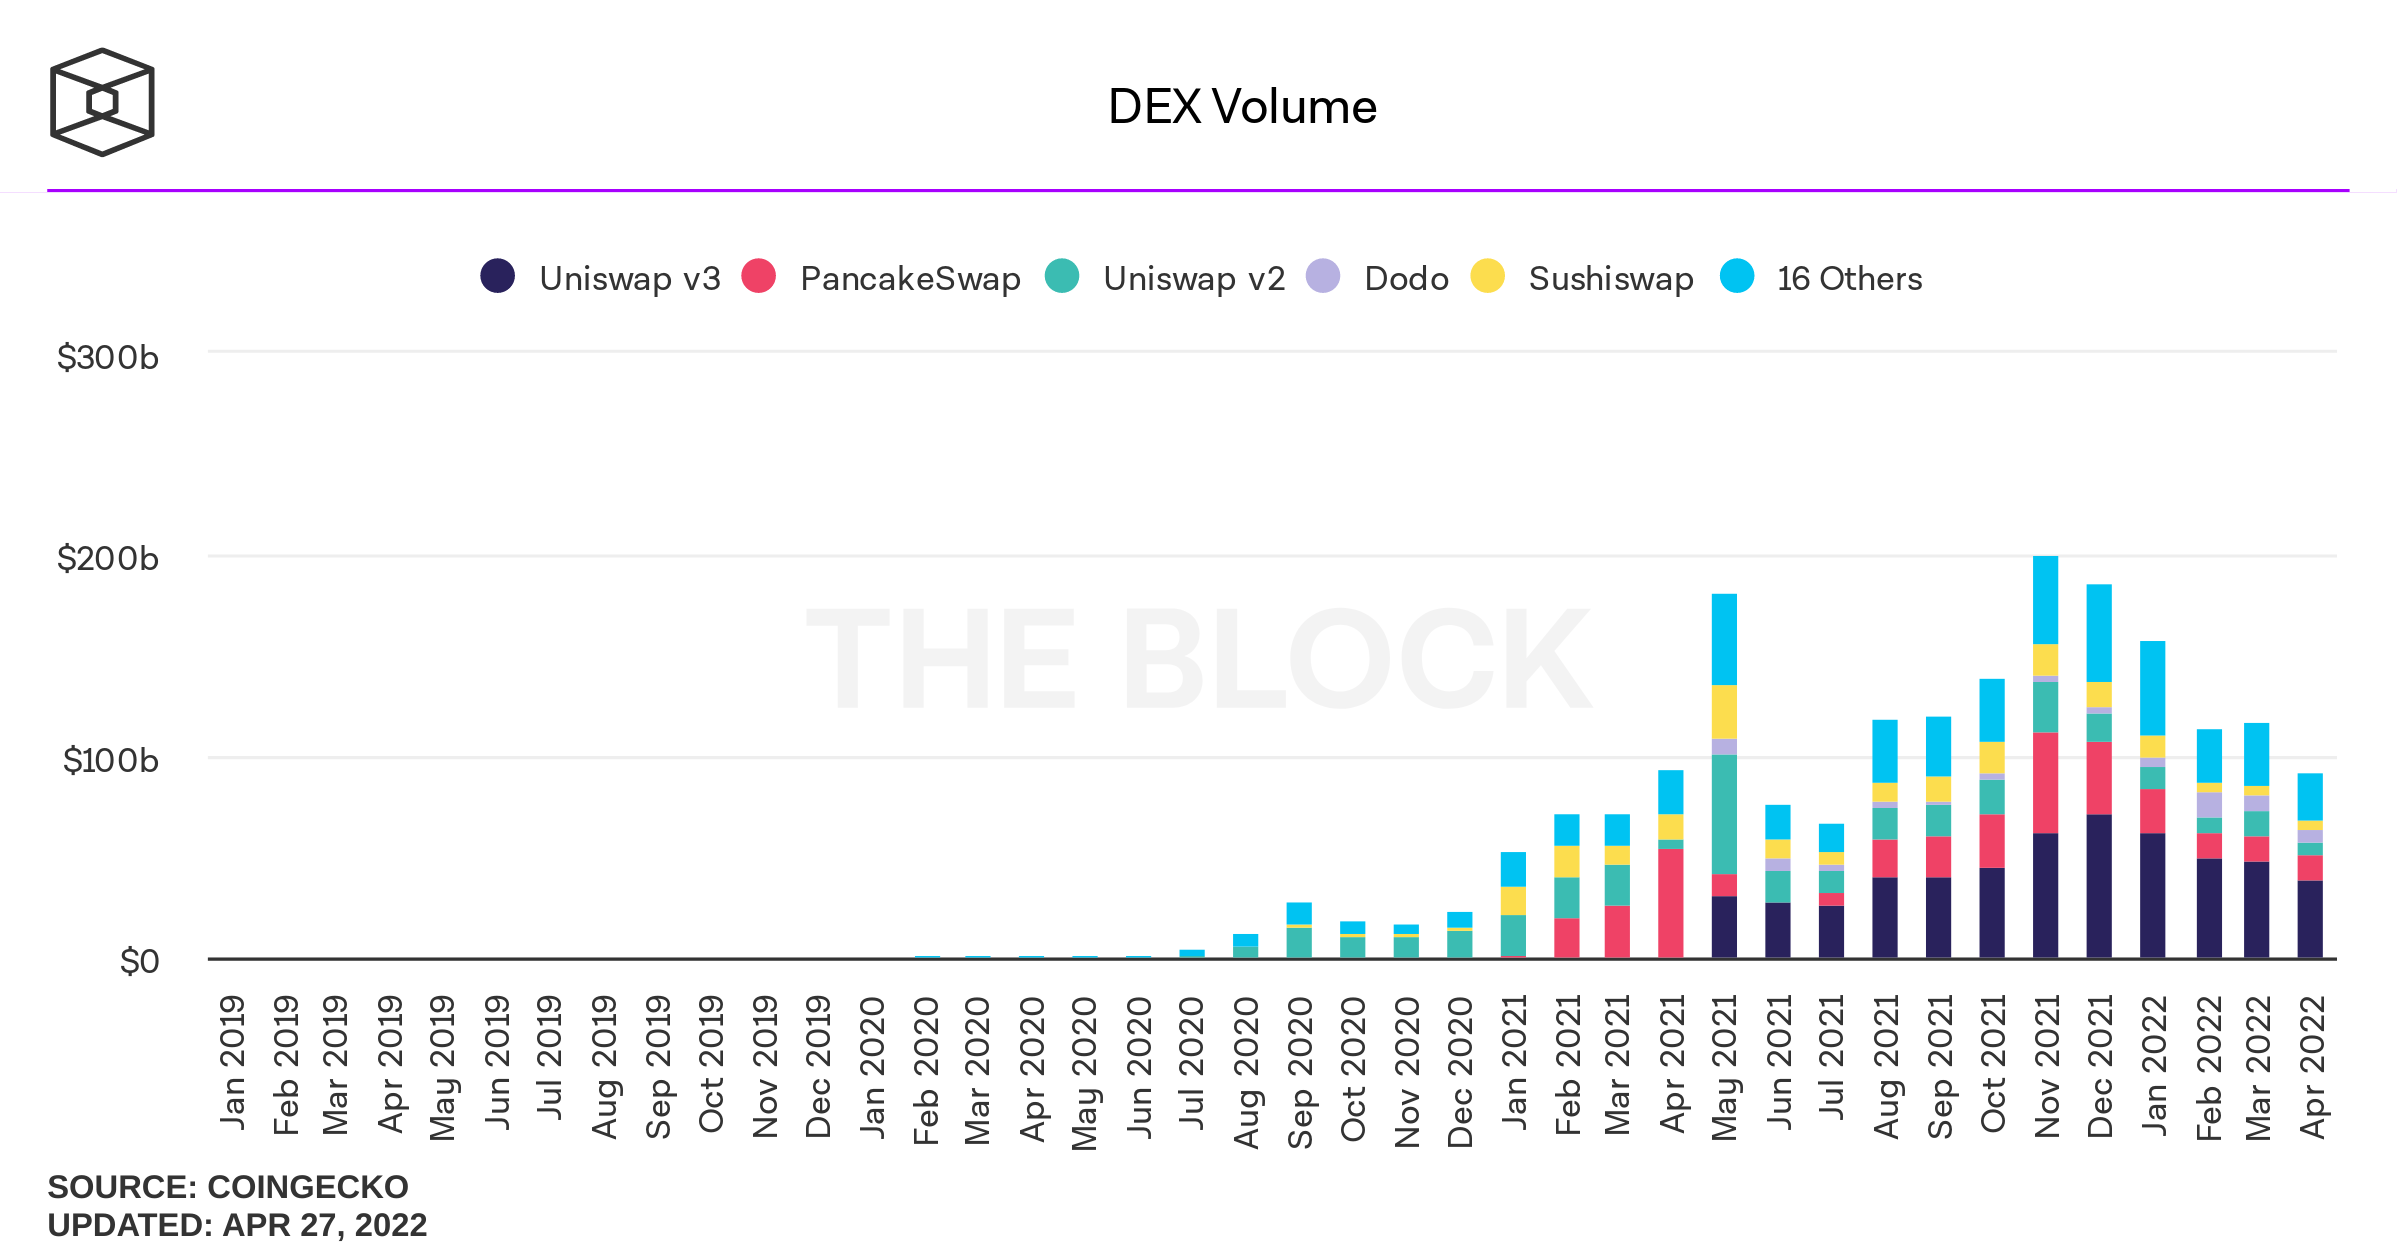 The value locked in Defi falls below $200 billion, and Dex volume in April is down 21% from March